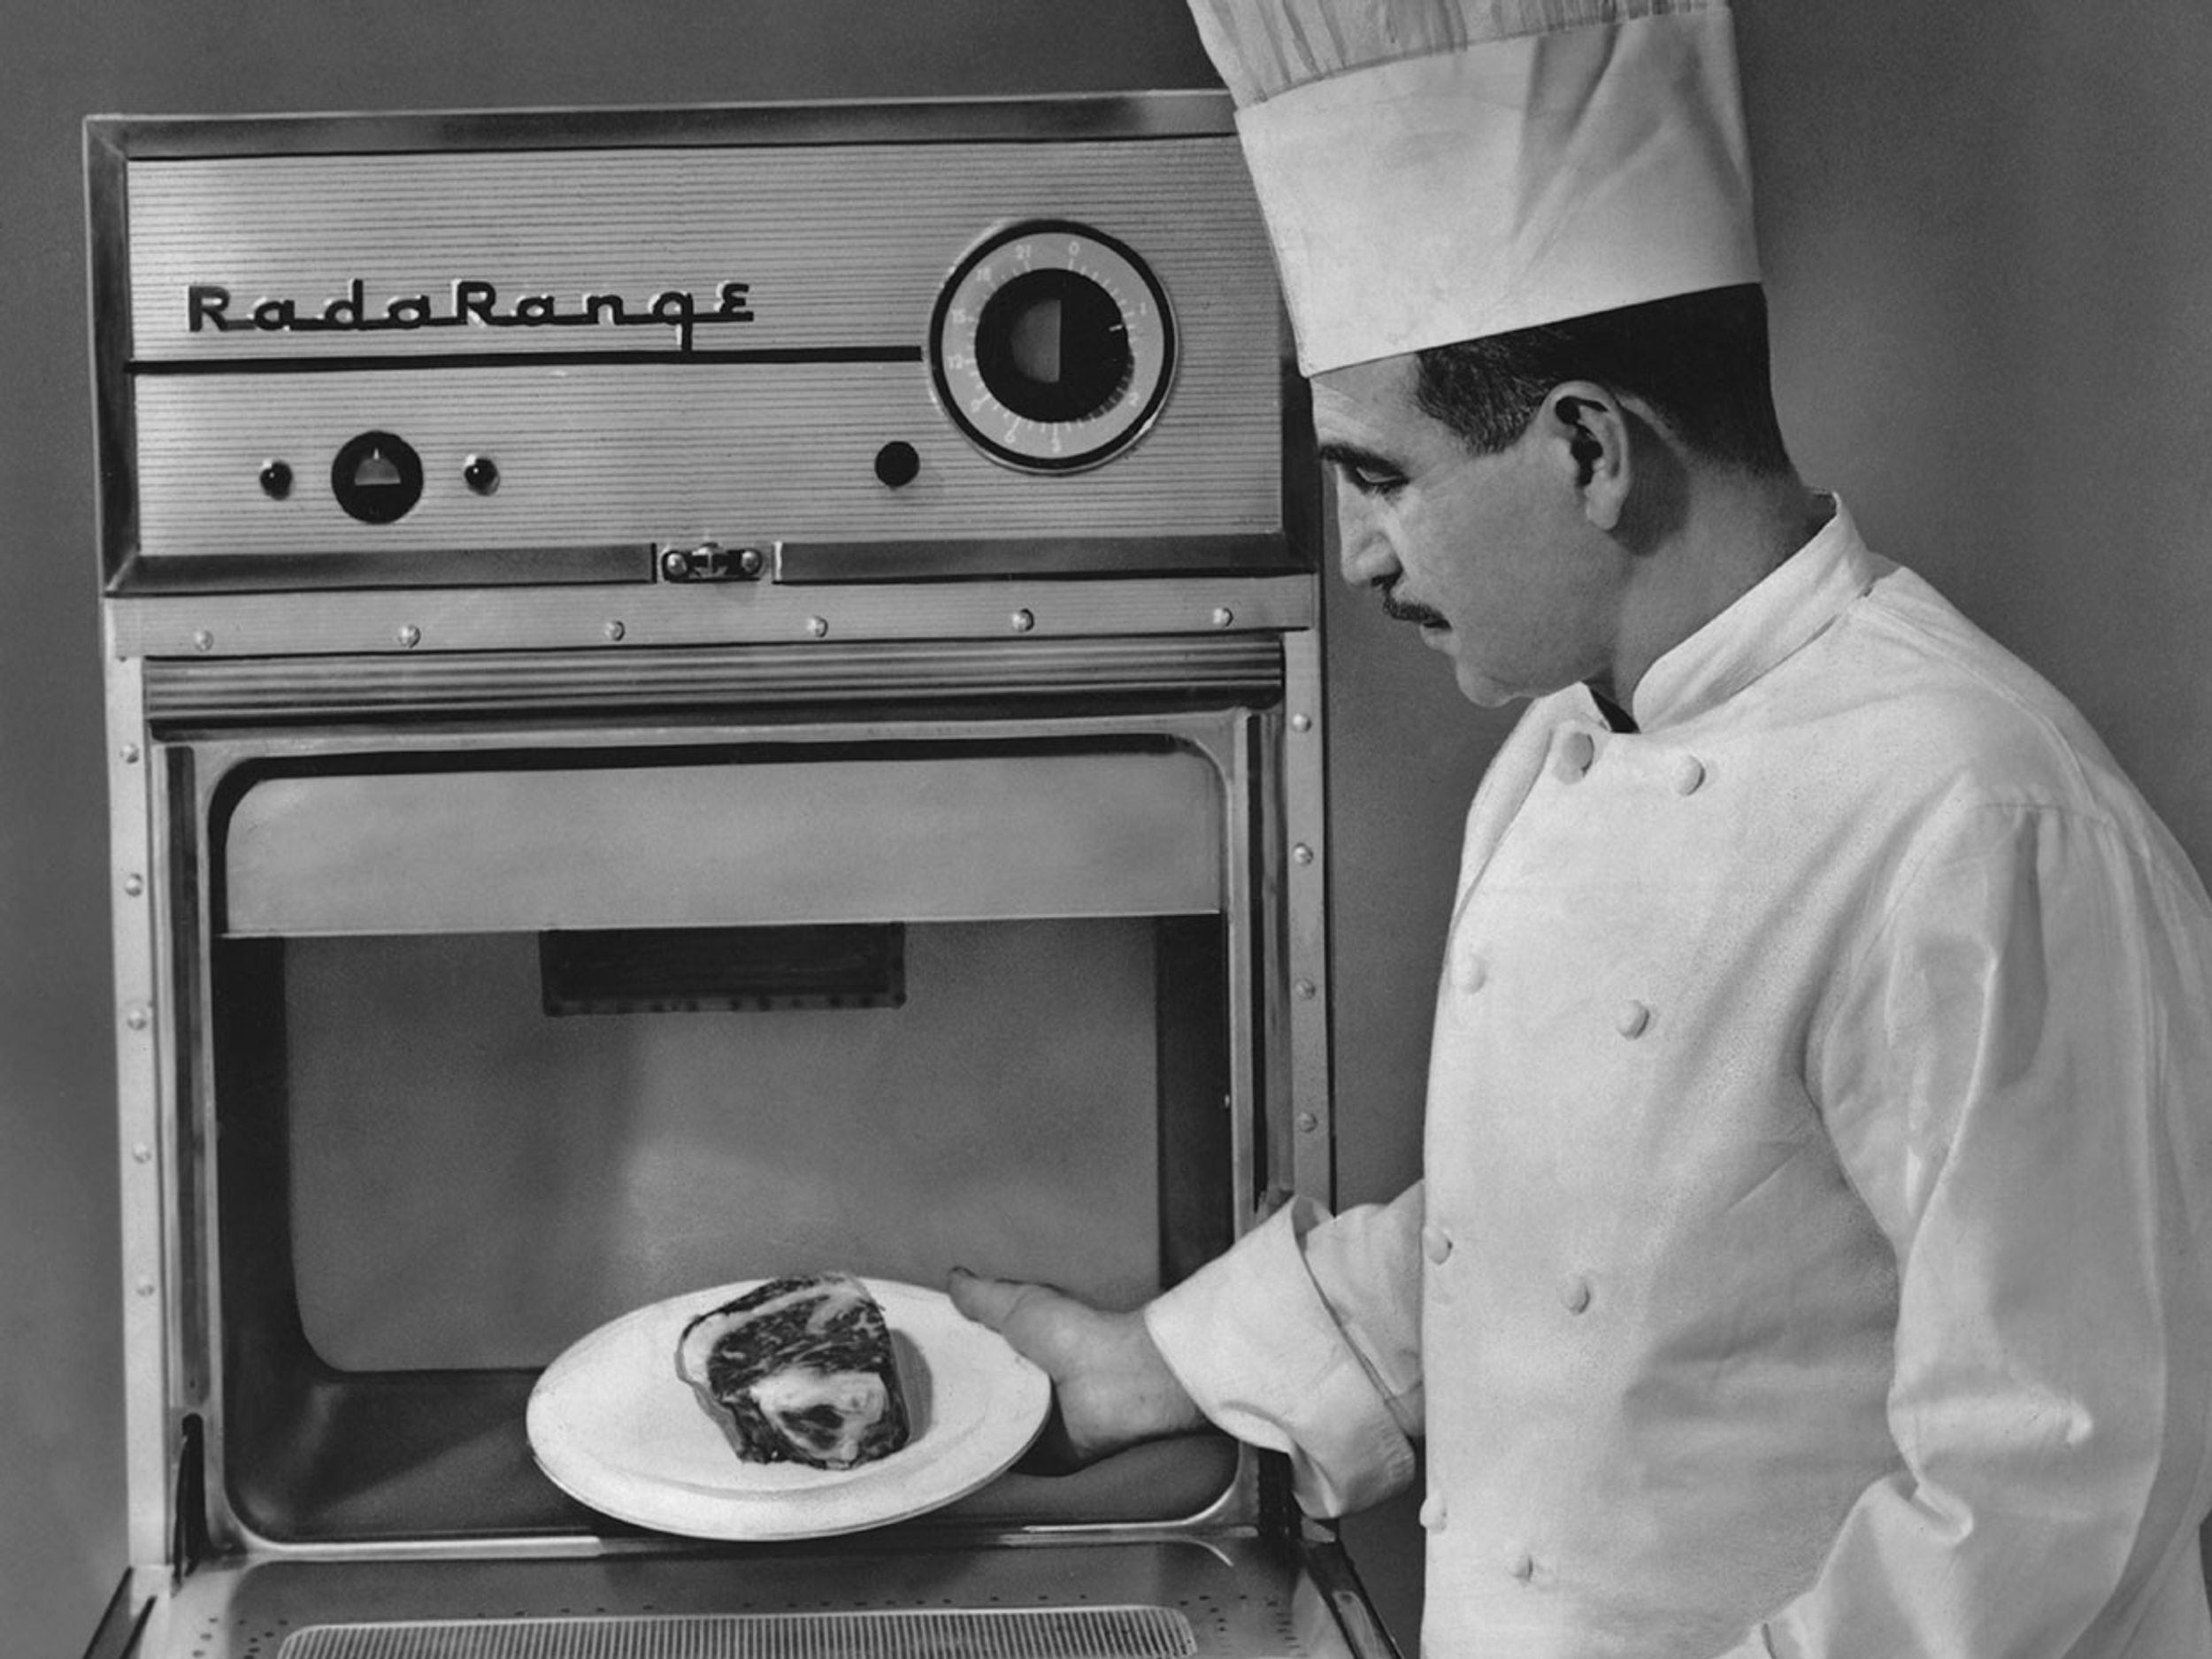 Raytheon’s Radarange III microwave oven debuted in 1955 and was sold in limited quantities to restaurants. 